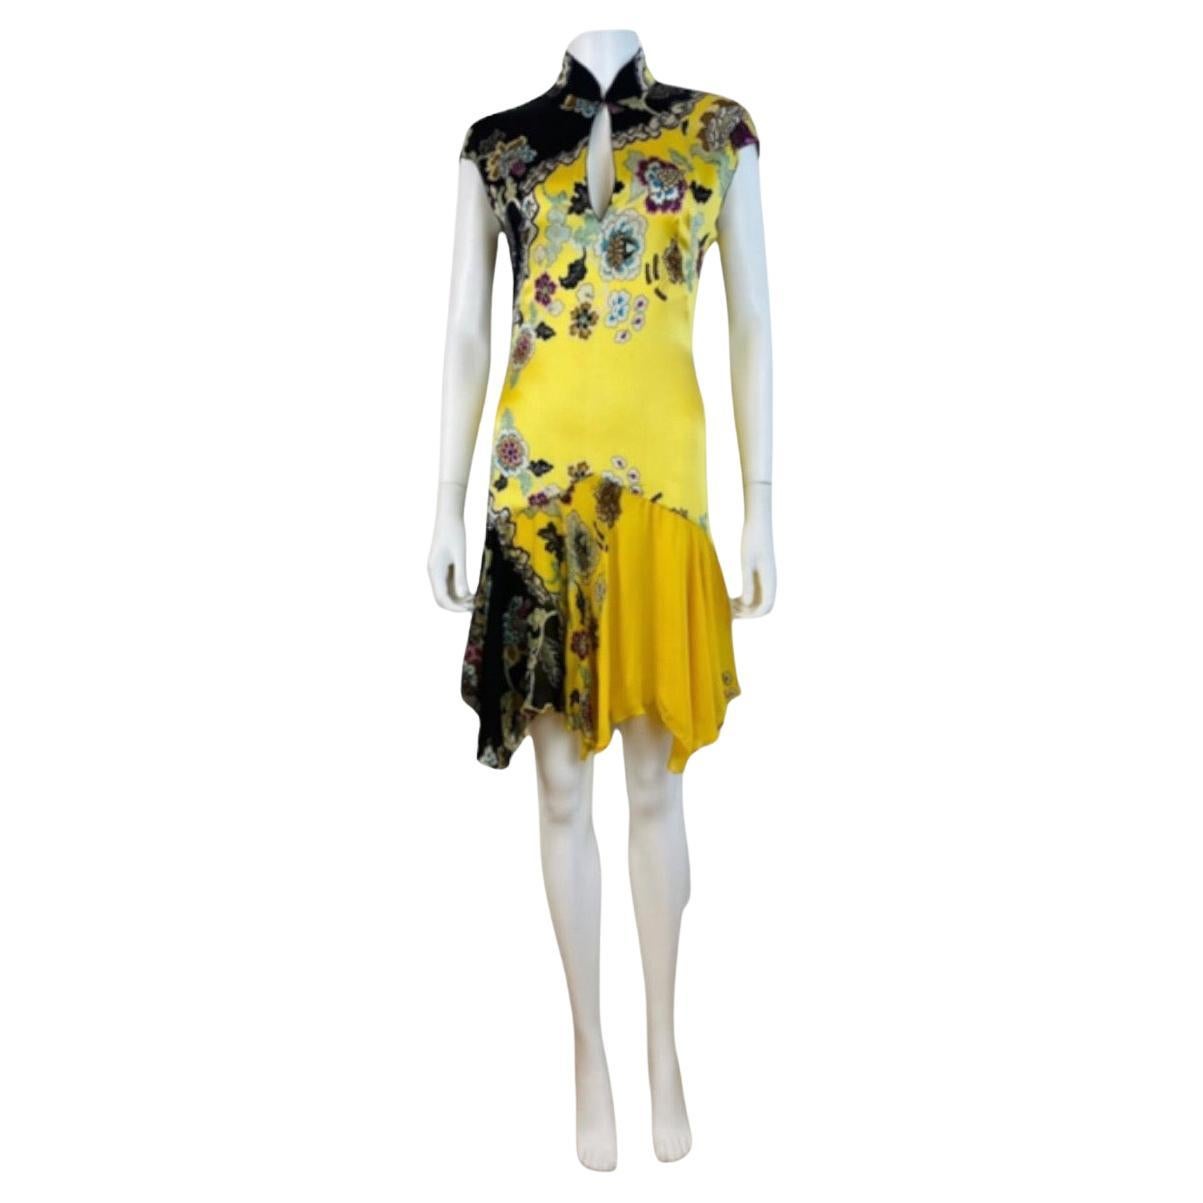 Vintage Roberto Cavalli S/S 2003 Chinoiserie Yellow Floral Silk Mini Dress For Sale